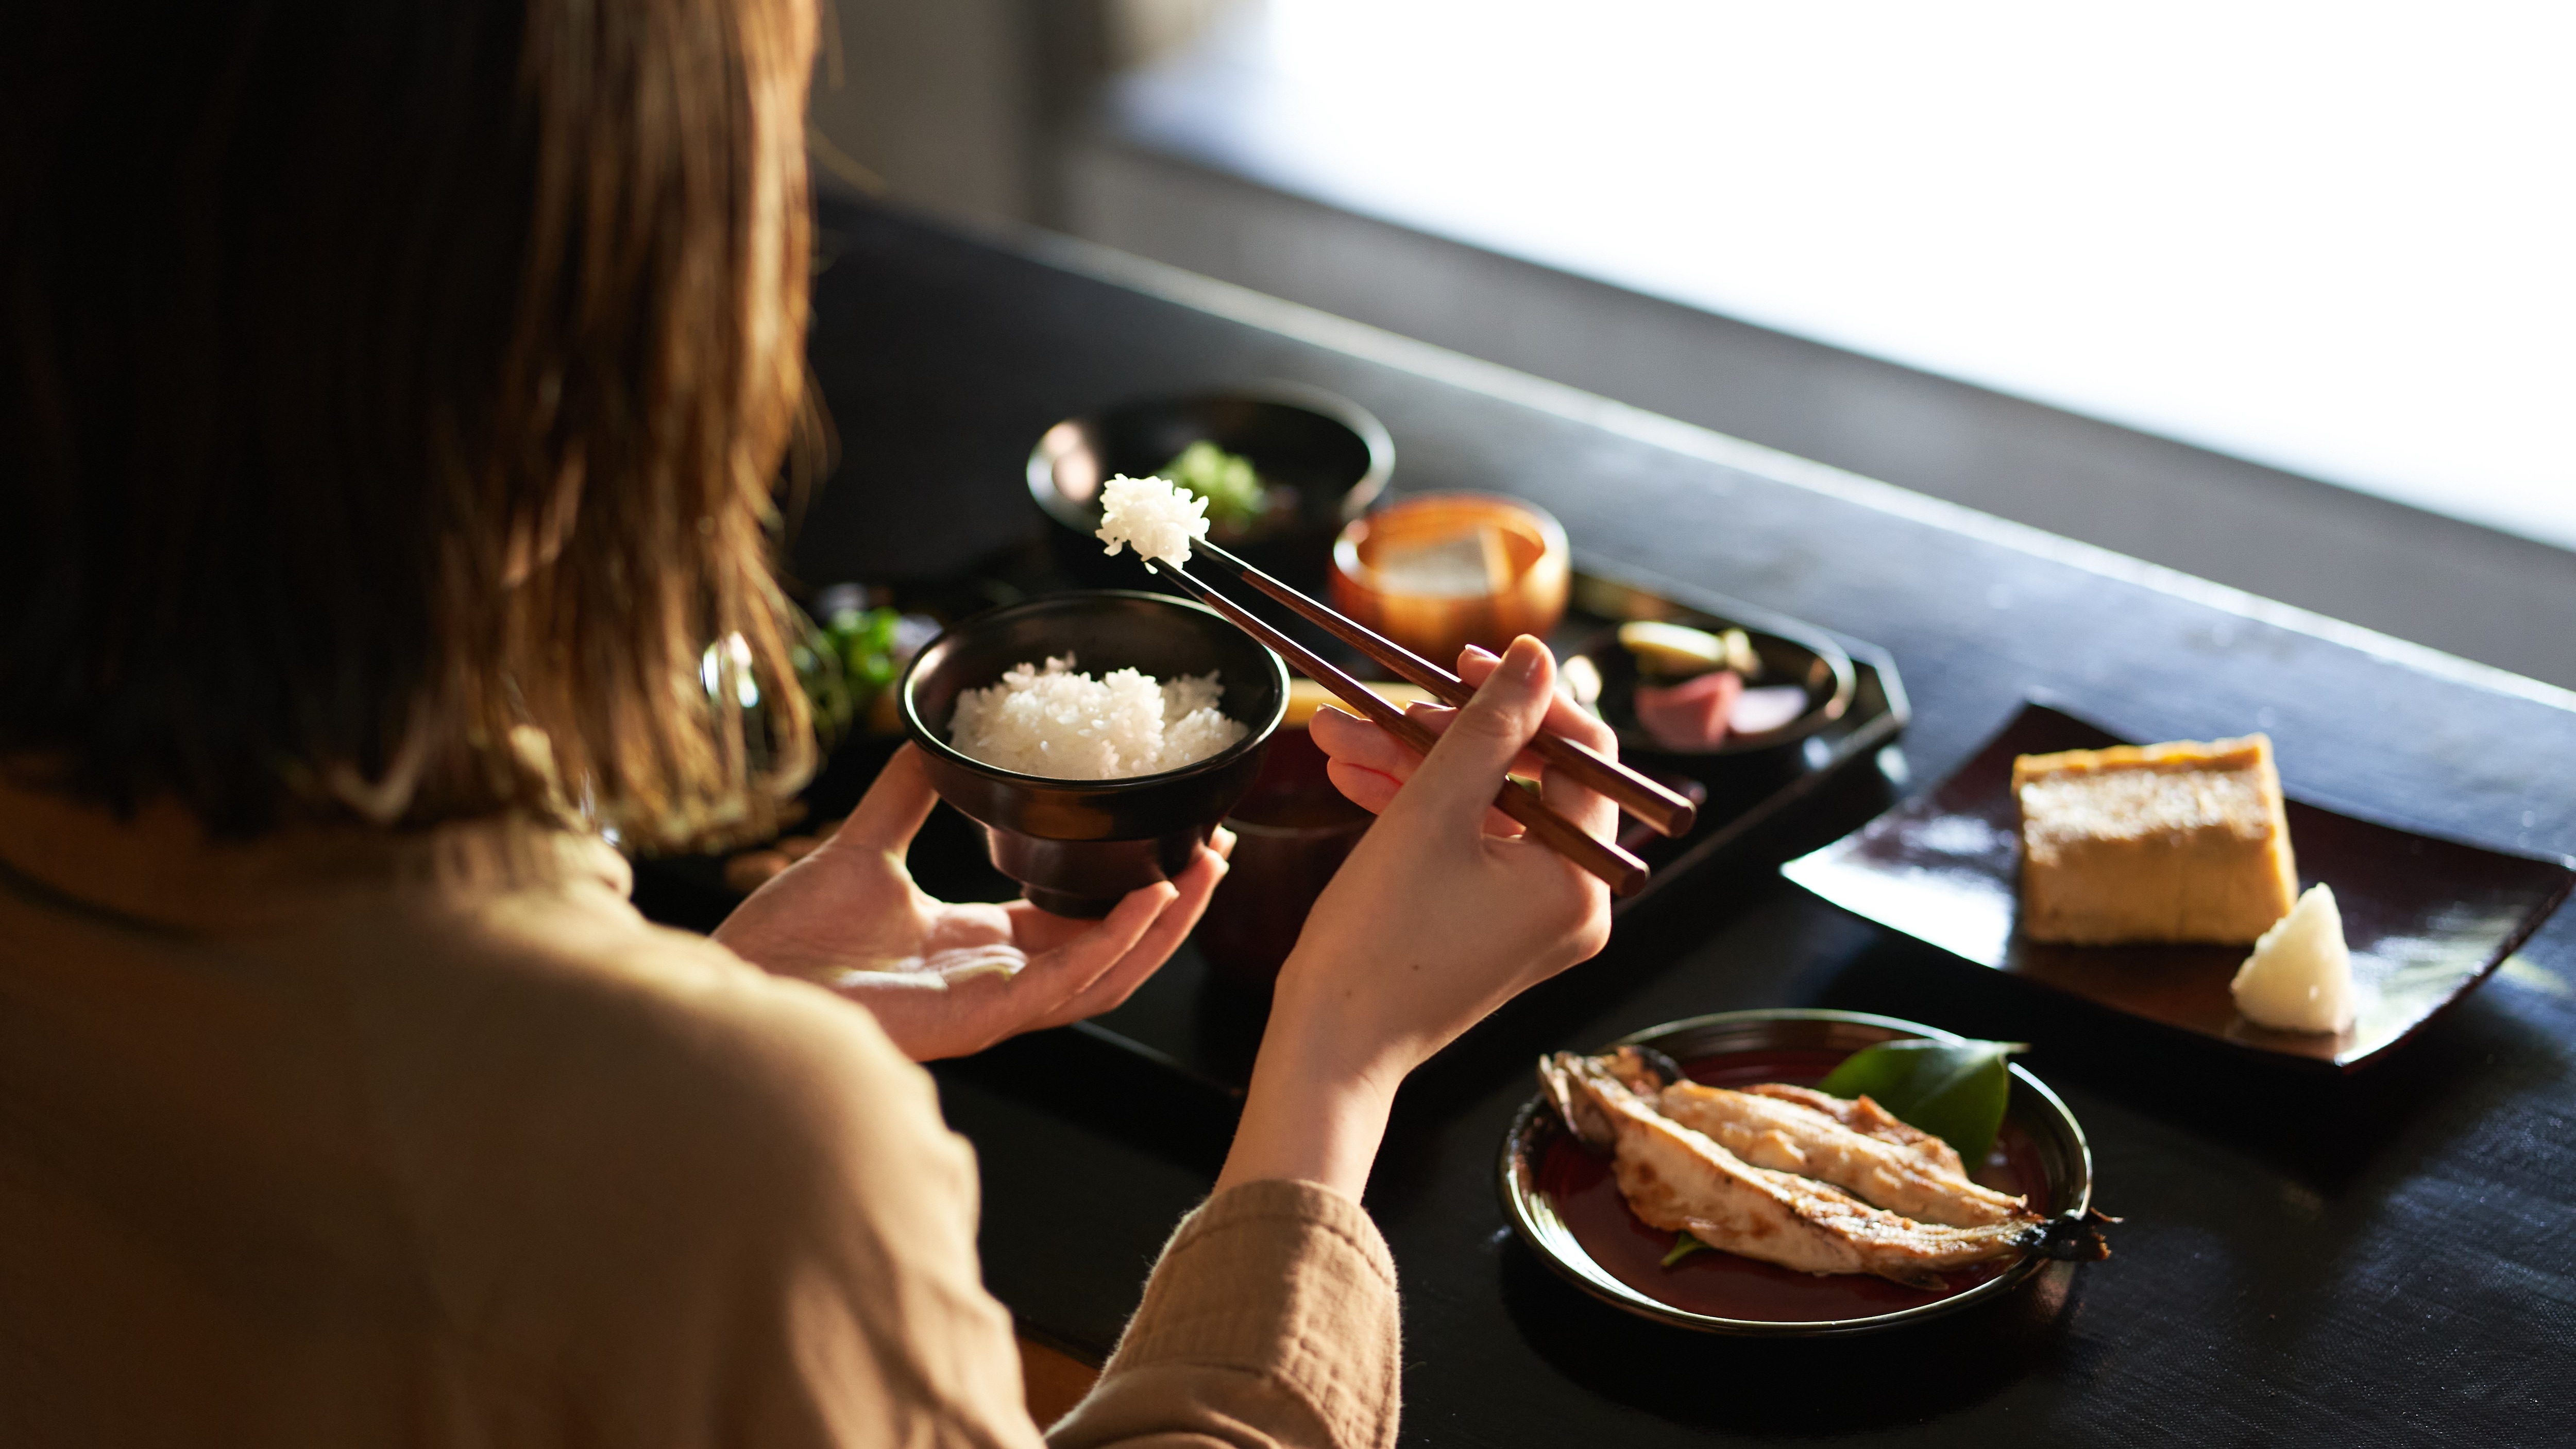 Enjoy your breakfast with homemade side dishes and freshly cooked clay pot rice.